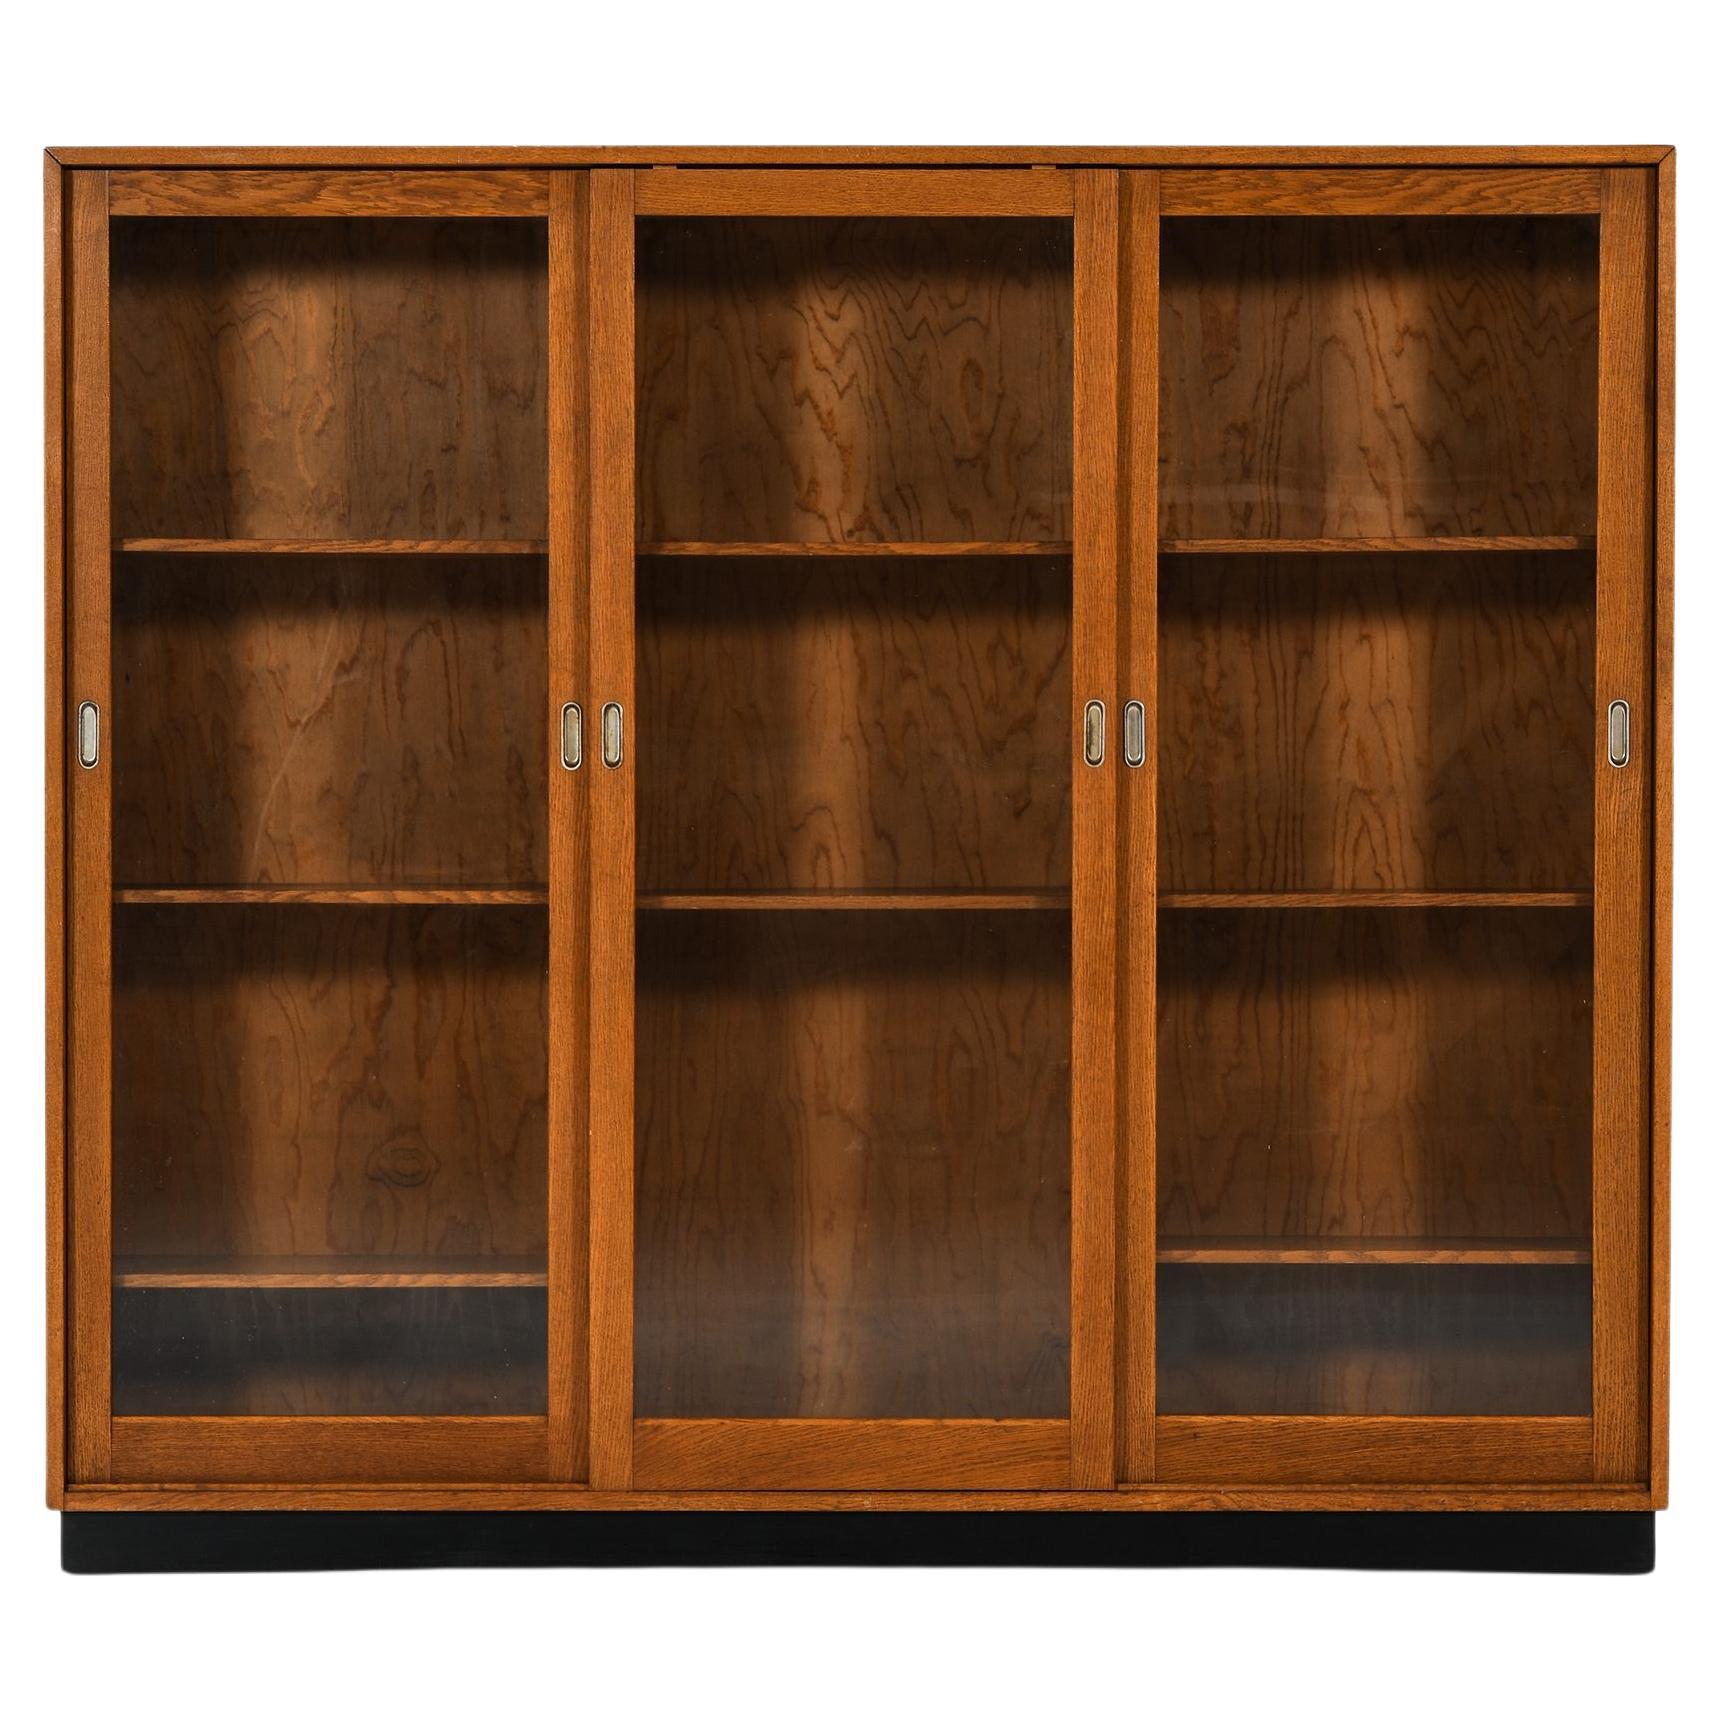 Large Display Cabinet in Oak, Pine and Metal, 1940’s For Sale